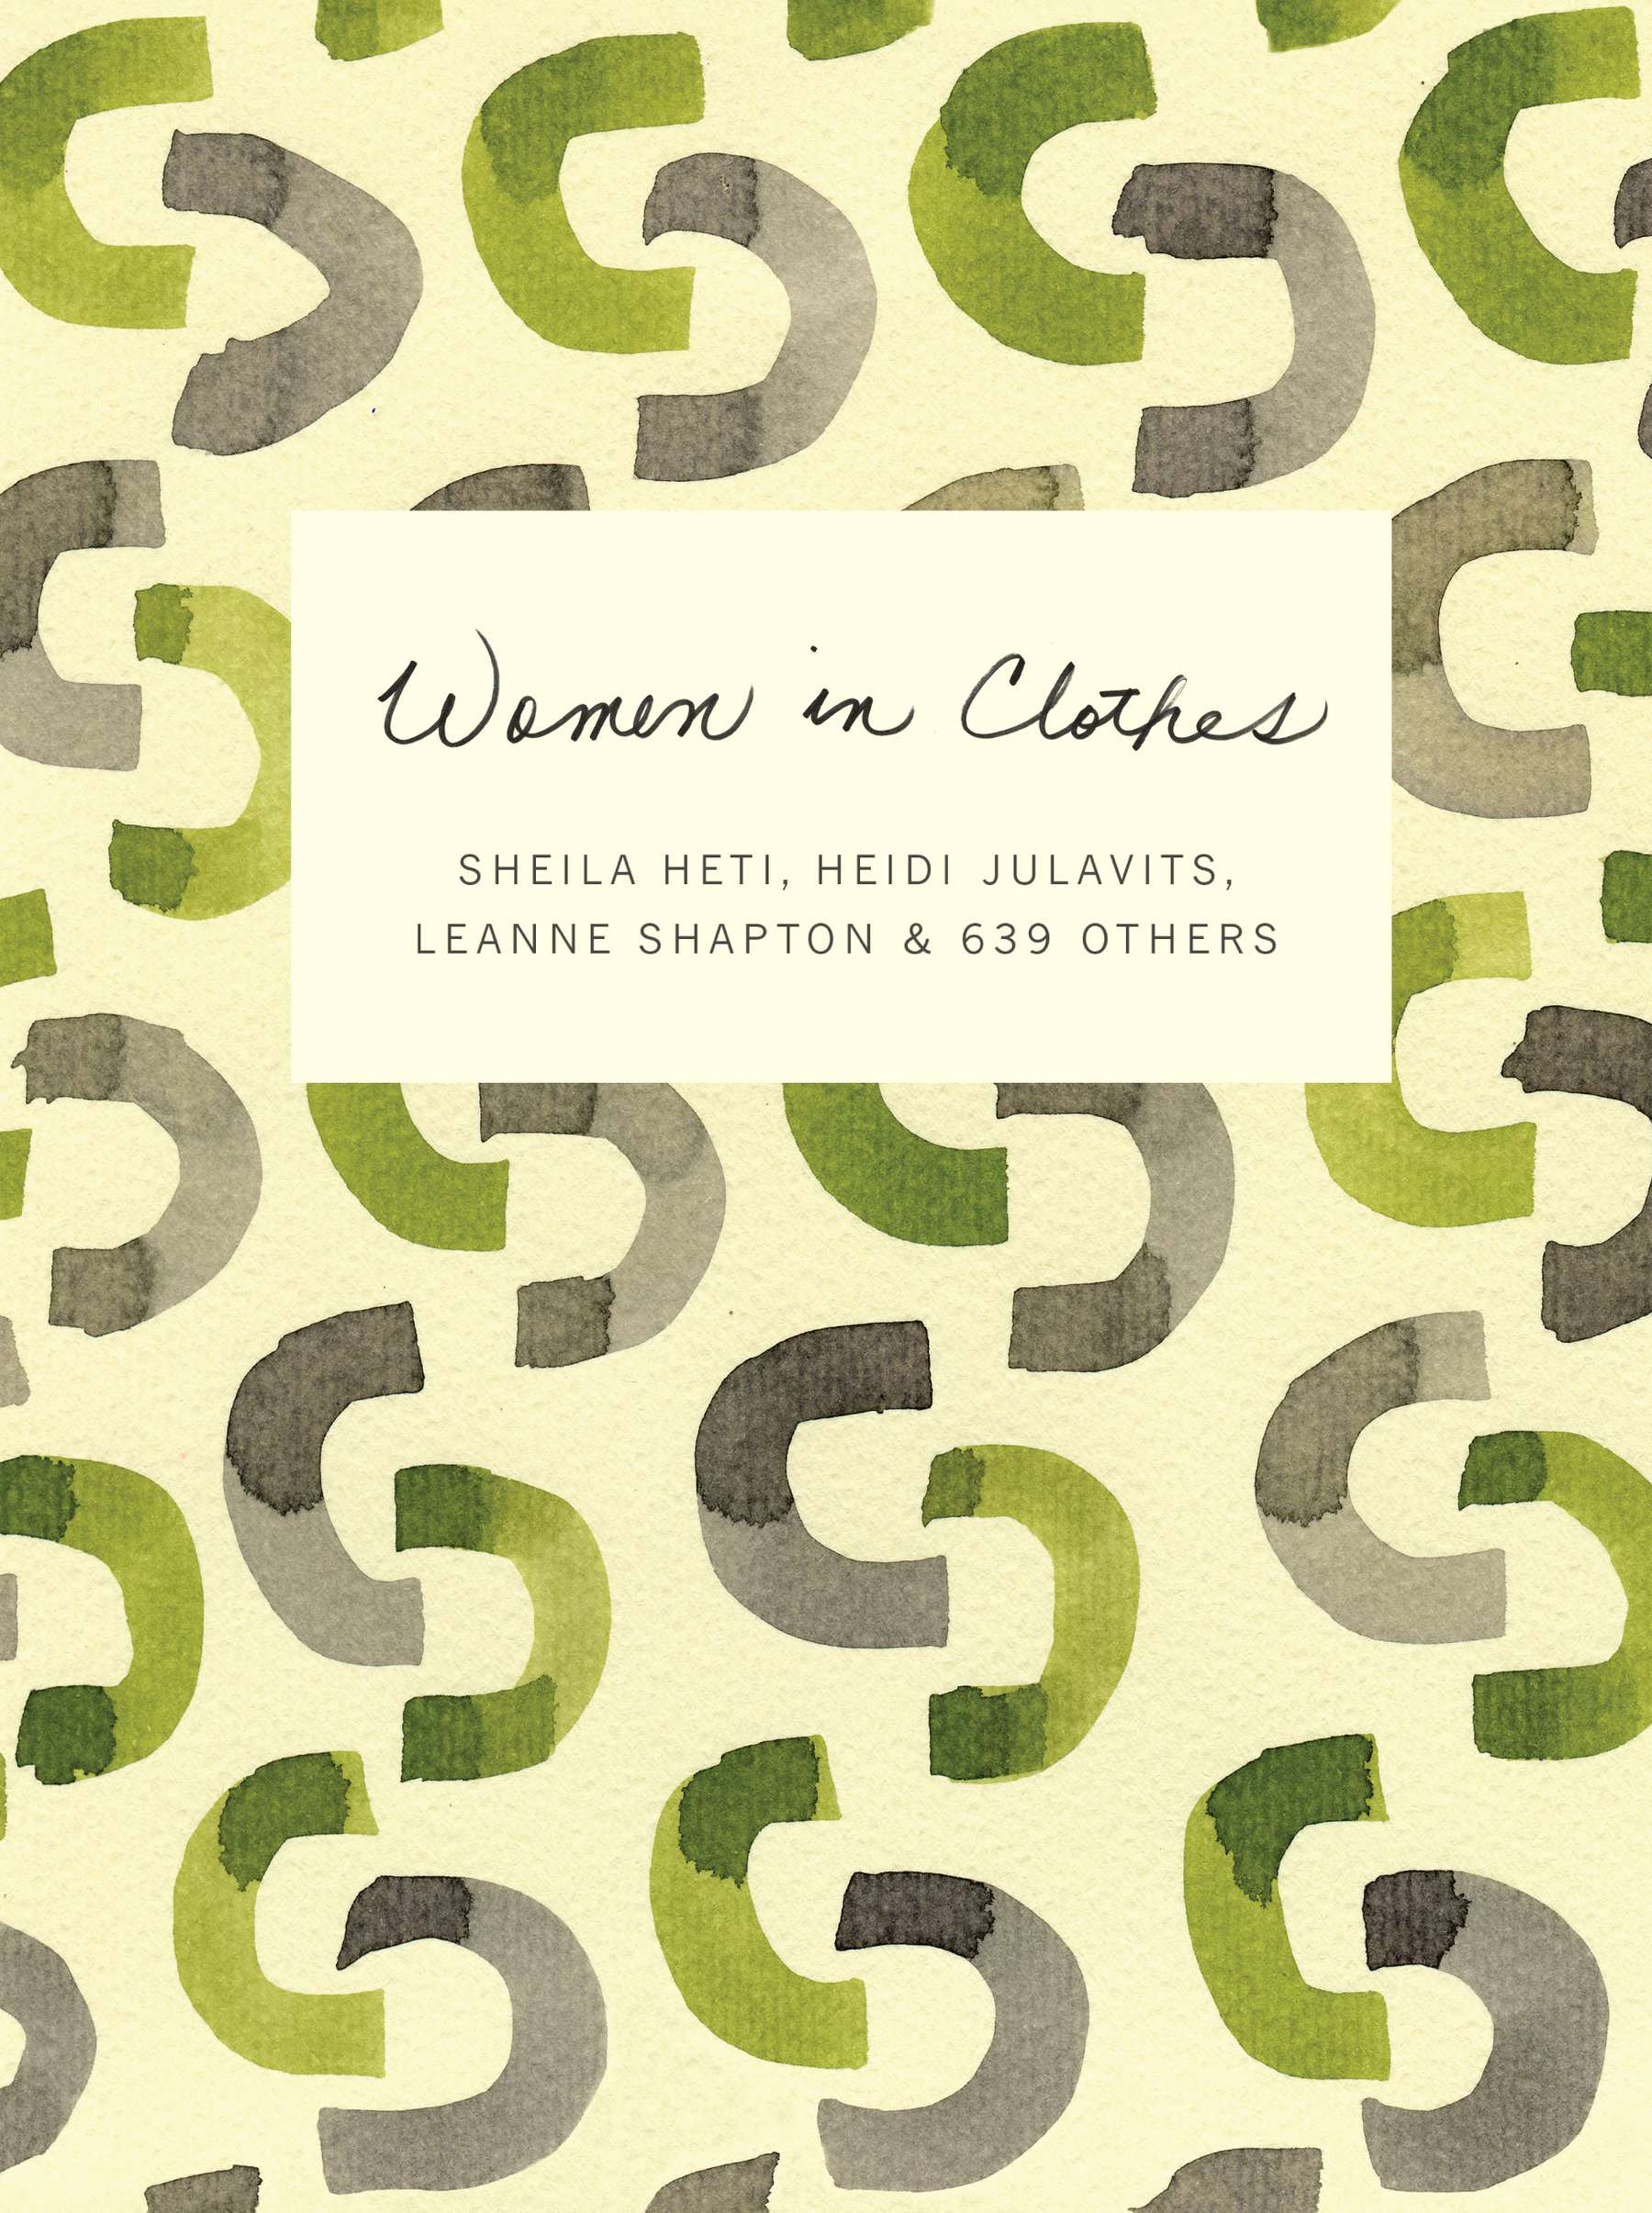 Book Launch: Women in Clothes by Sheila Heti, Heidi Julavits, Leanne Shapton, & 639 Others